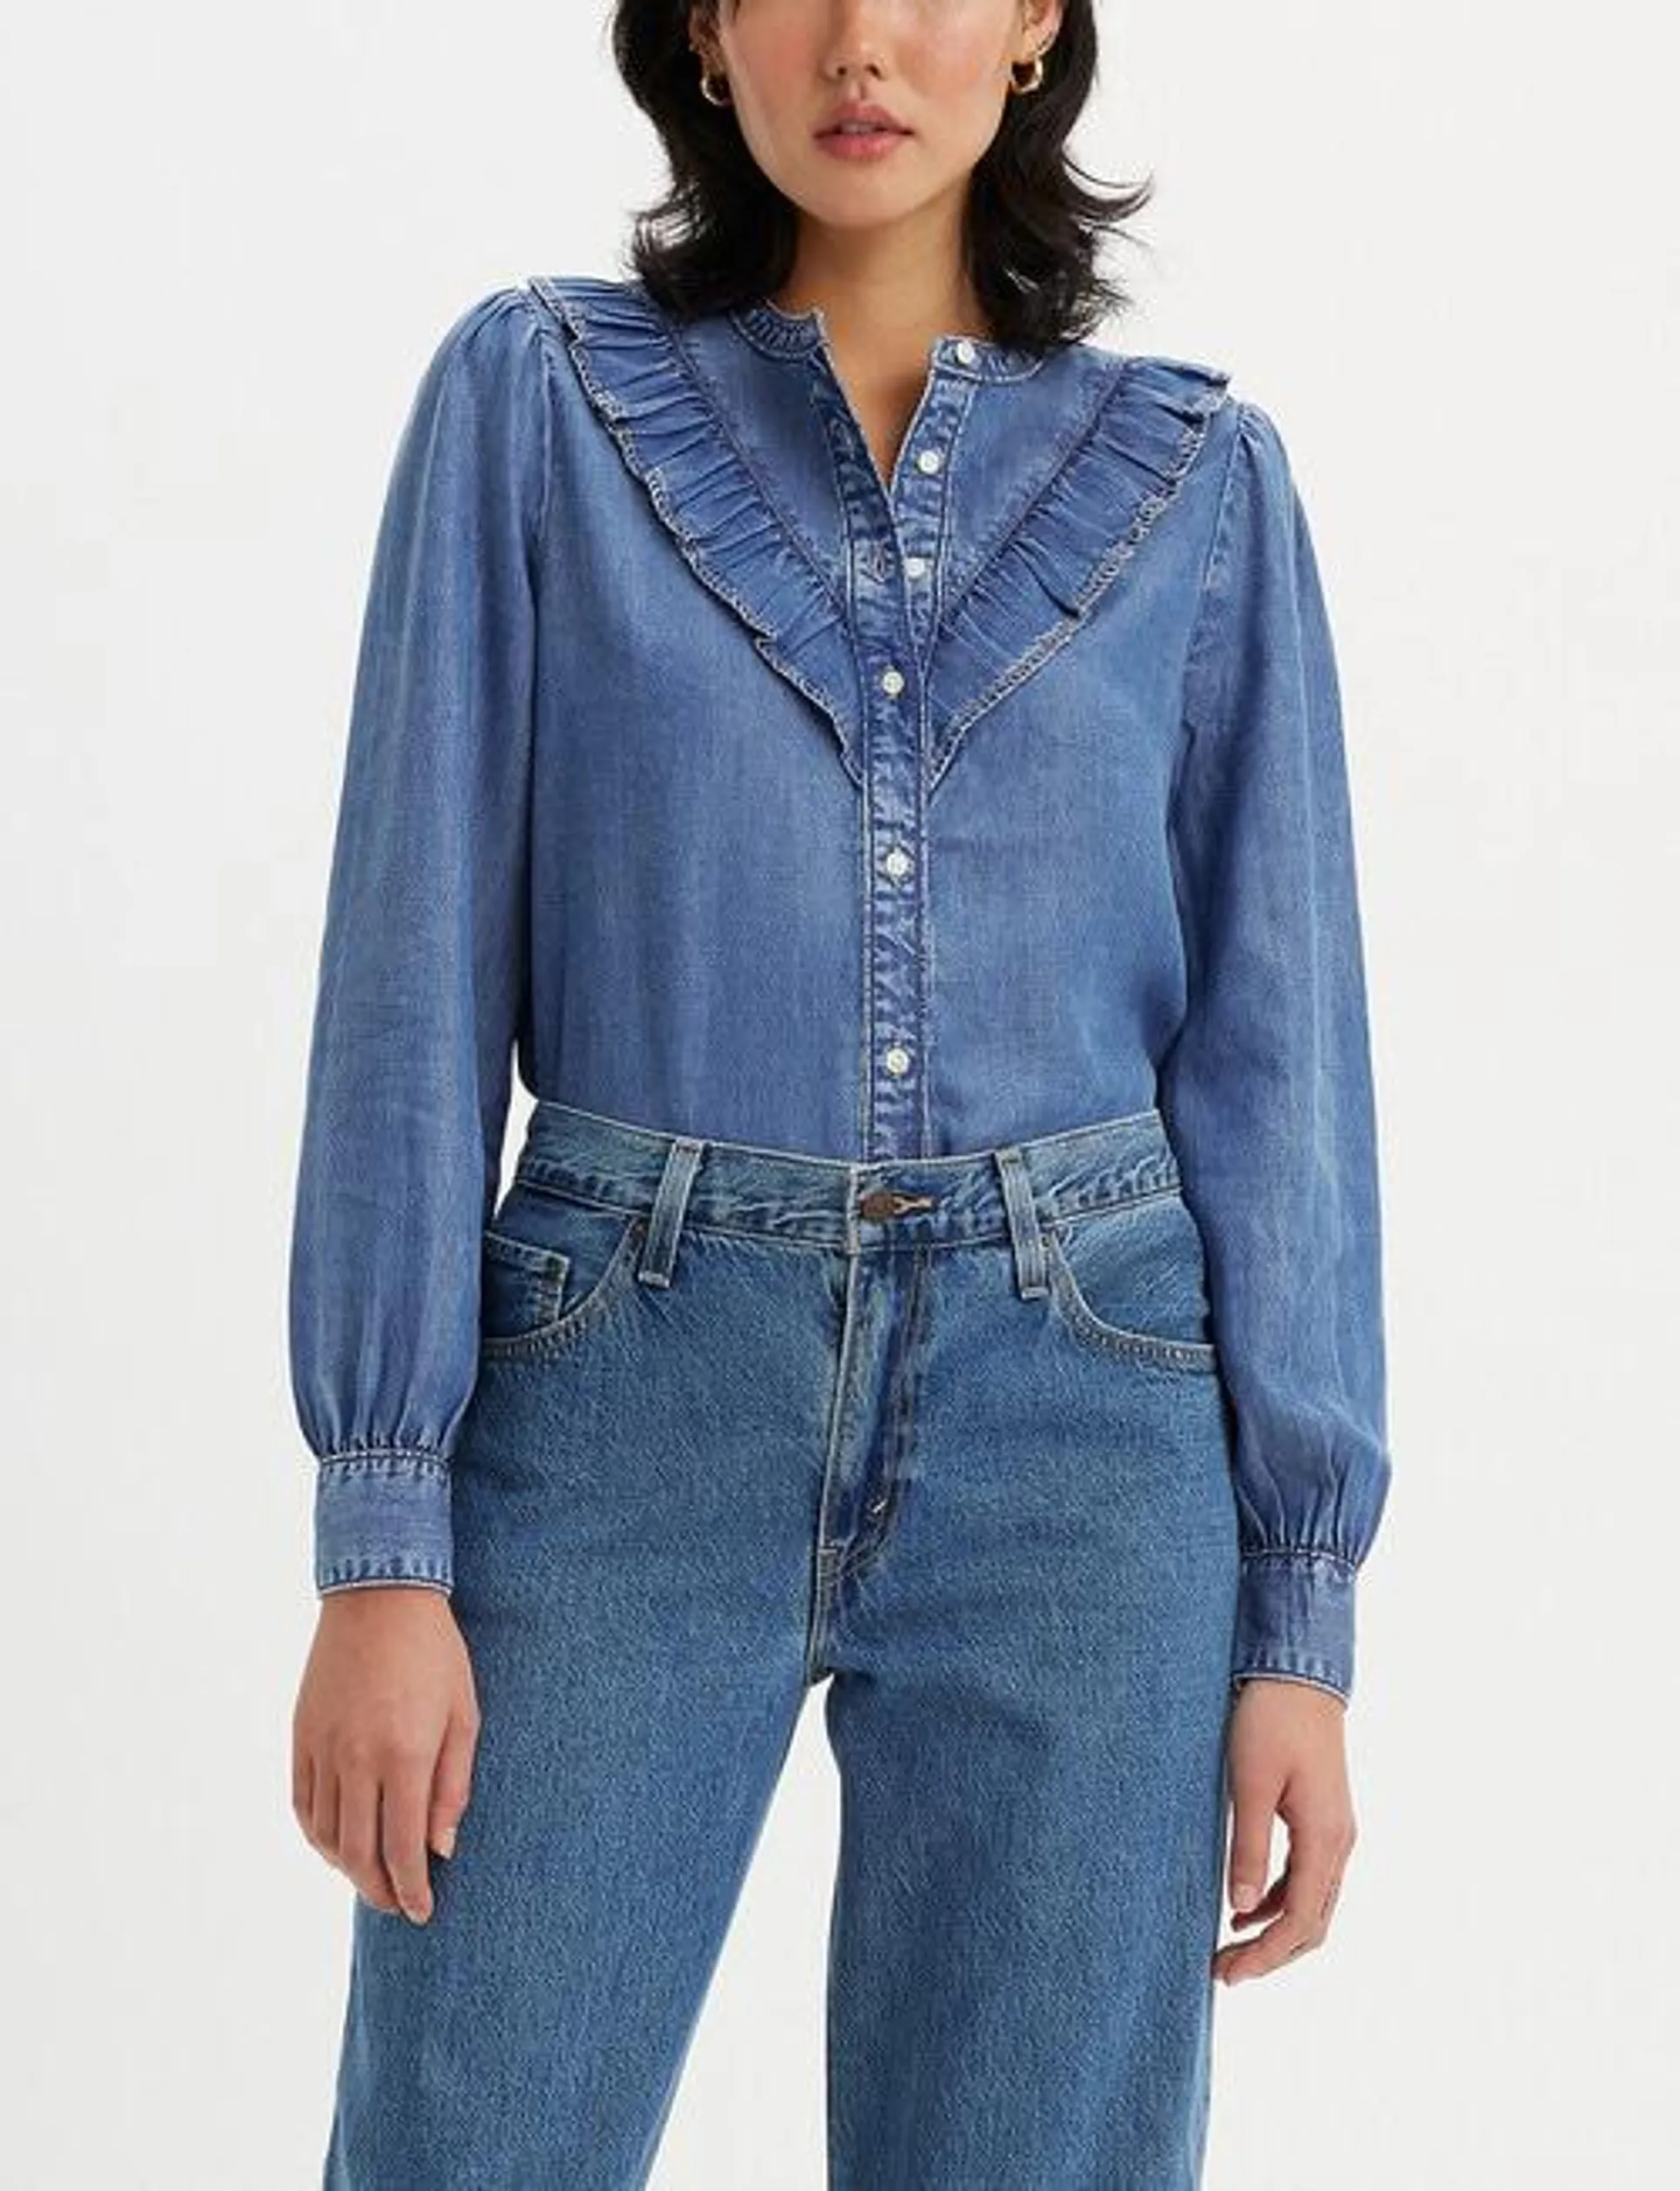 Levis Carinna Blouse, Denim in Patches 2